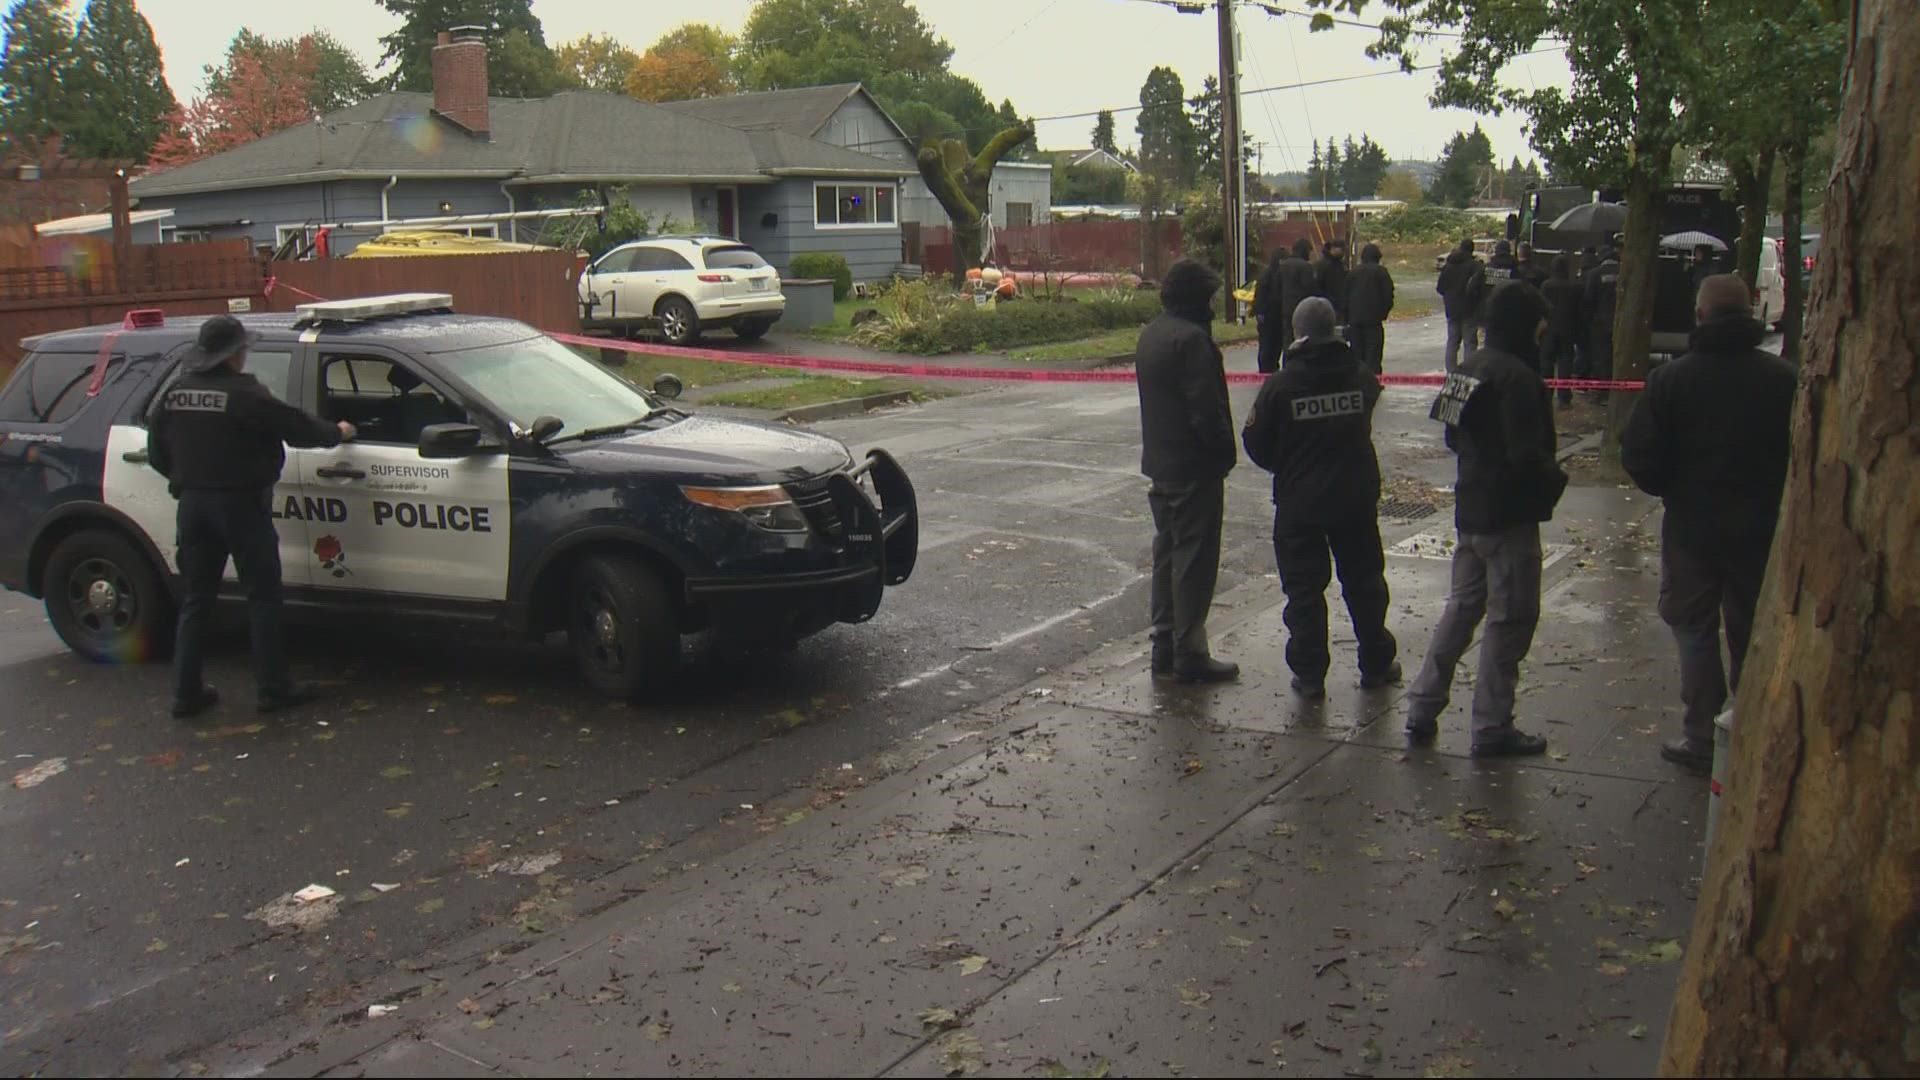 Portland police said that the man was alive and surrendered to officers some time after the initial shooting on SE 83rd Avenue.